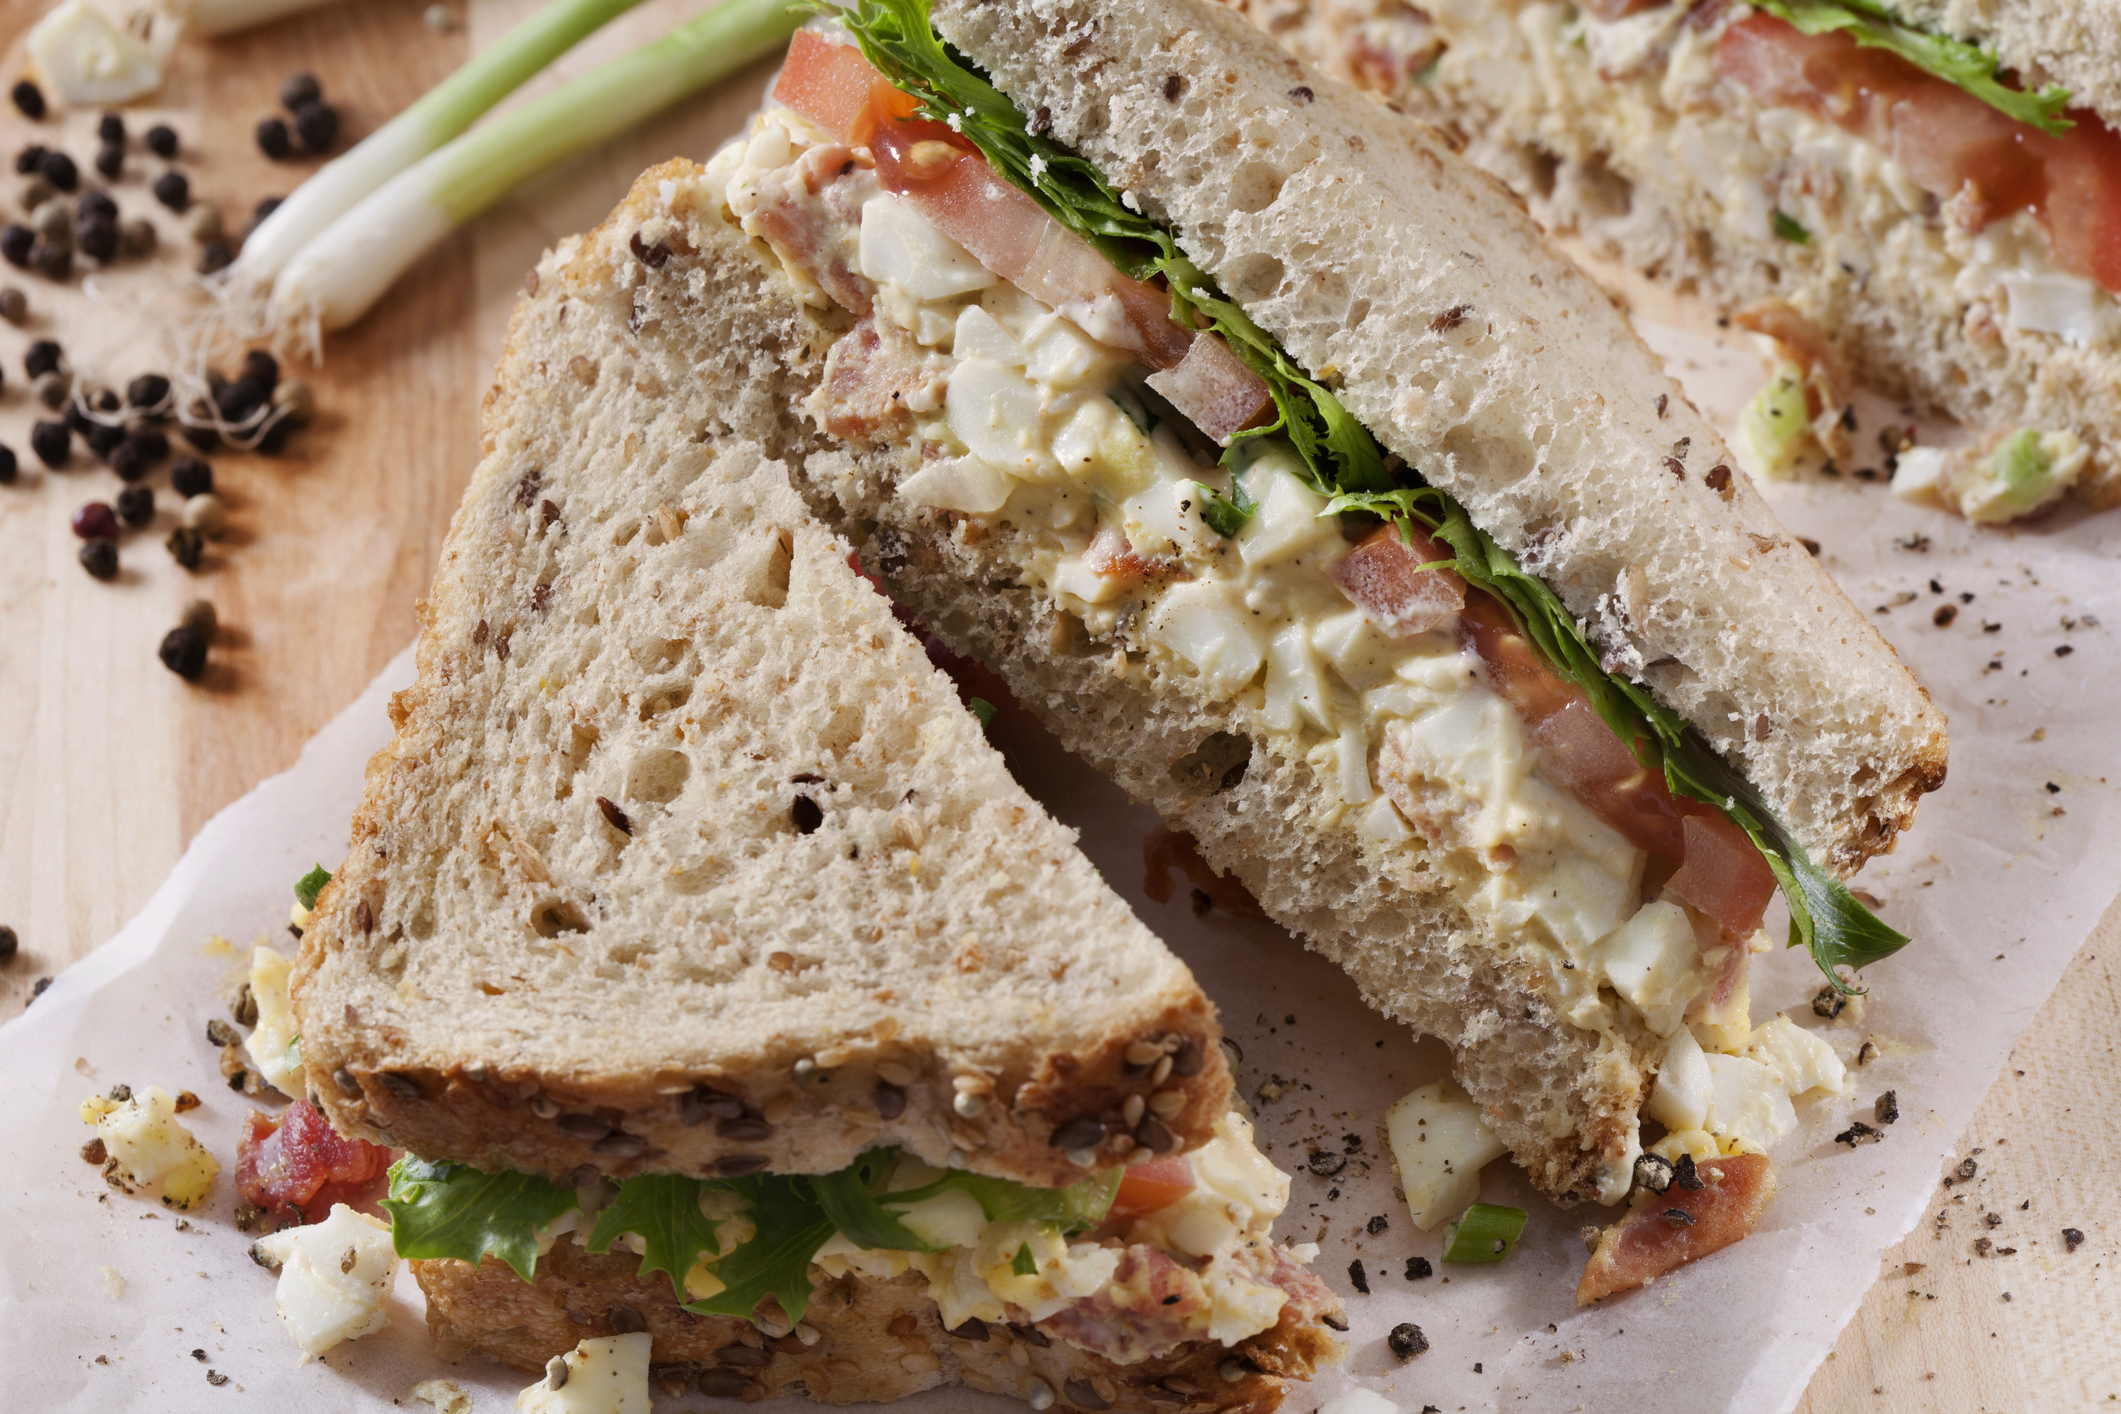 Egg salad sandwich with lettuce and tomato on a cutting board